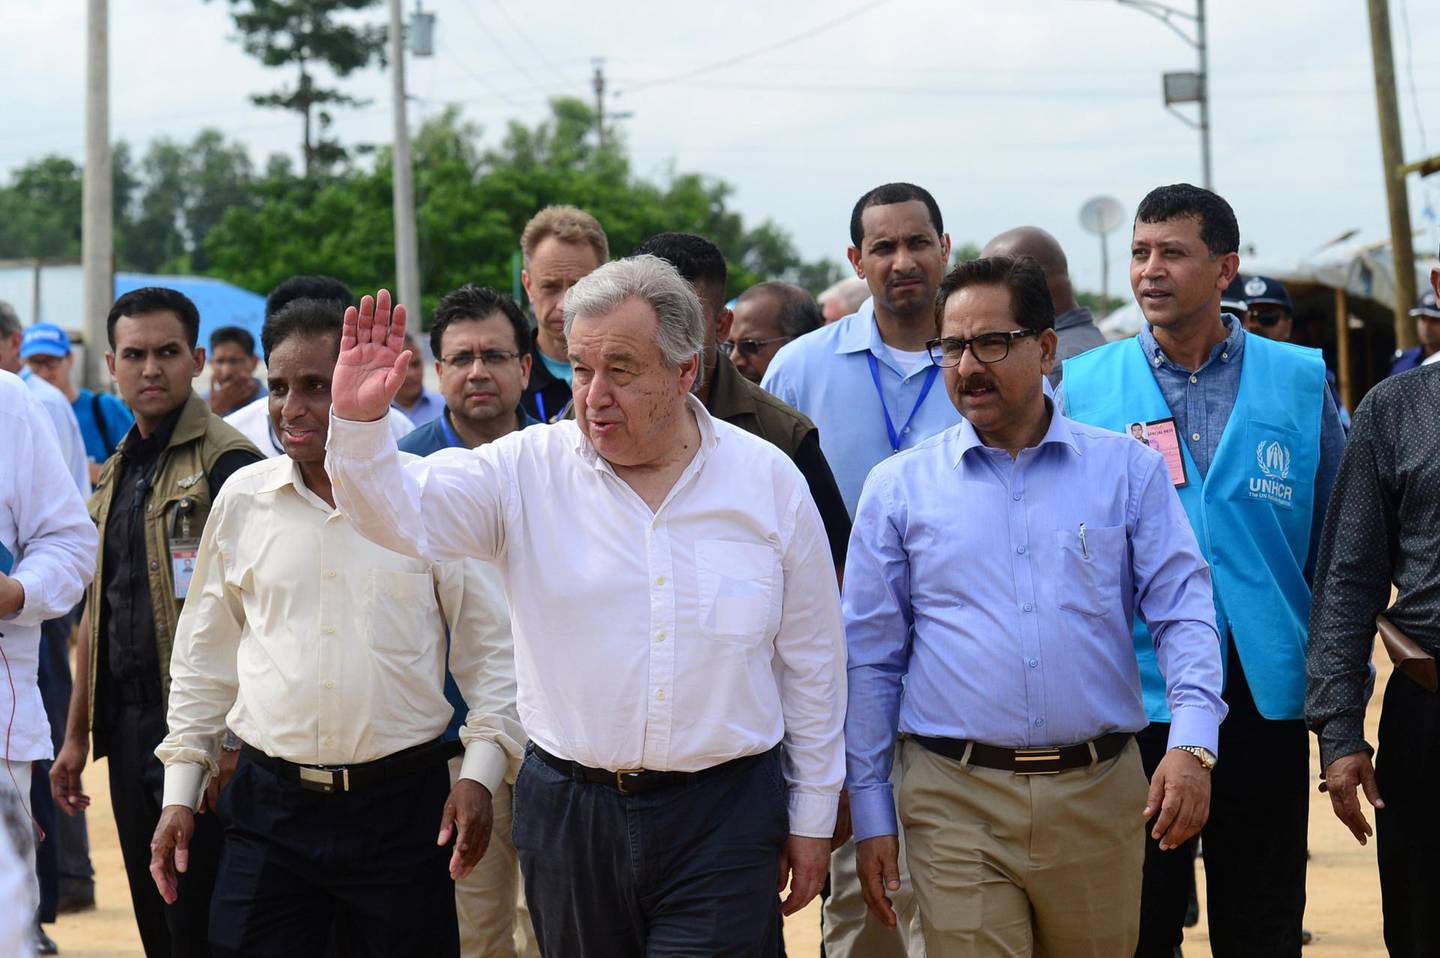 UN Secretary General Antonio Guterres (C) arrives at the Kutupalong refugee camp during his visit to the Rohingya community in Bangladesh's southeastern border district of Cox's Bazar on July 2, 2018.
UN Secretary General Antonio Guterres said he heard "unimaginable" accounts of atrocities during a visit July 2 to vast camps in Bangladesh that are home to a million Rohingya refugees who fled violence in Myanmar. / AFP PHOTO / MUNIR UZ ZAMAN